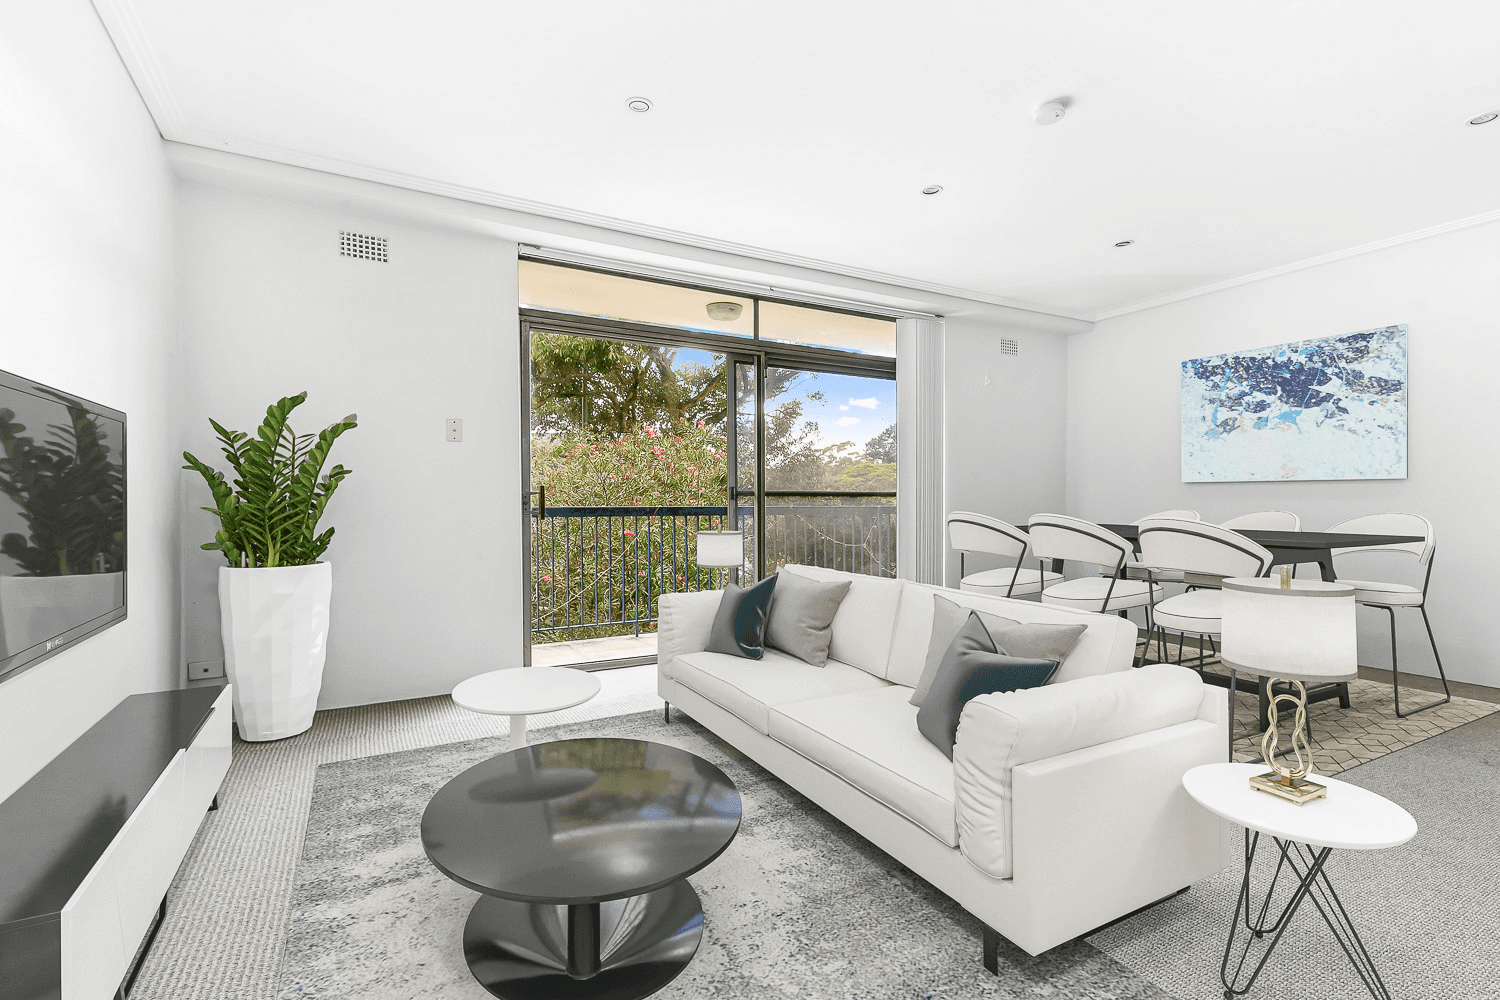 7/453 Old South Head Road, ROSE BAY, NSW 2029